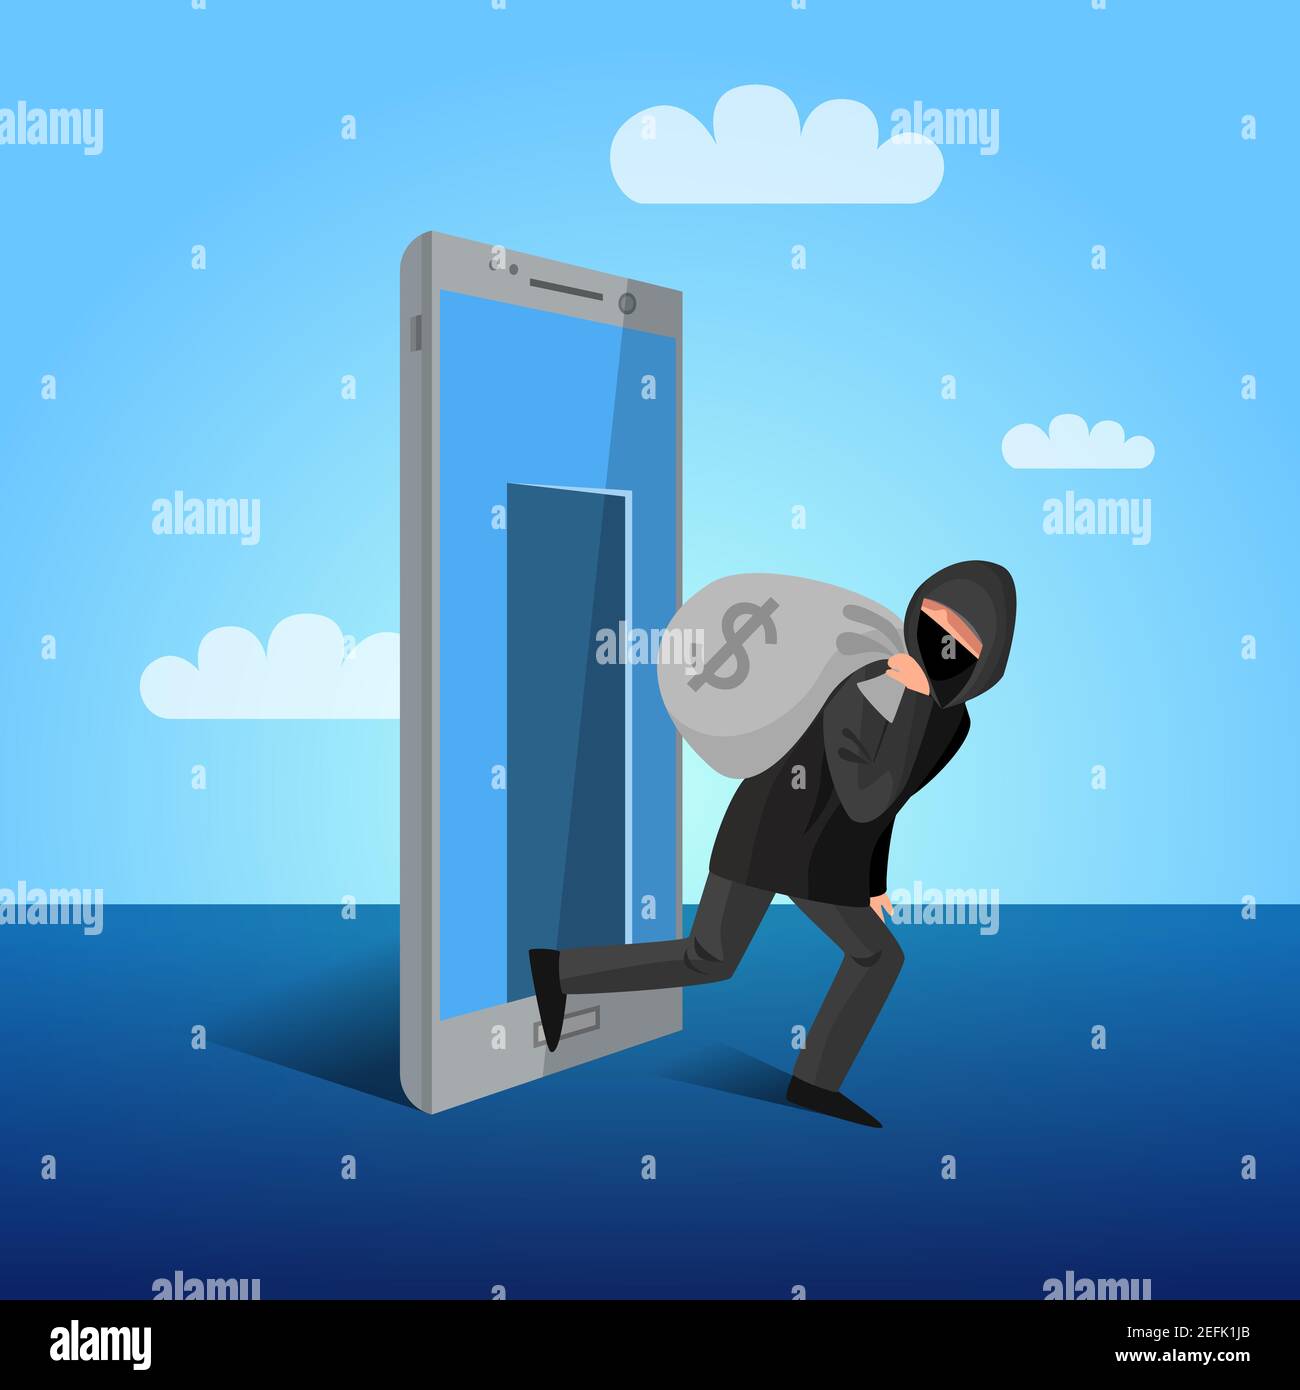 Smartphone hacker escaping through device screen with money mobile phones cyber attacks warning flat poster vector illustration Stock Vector